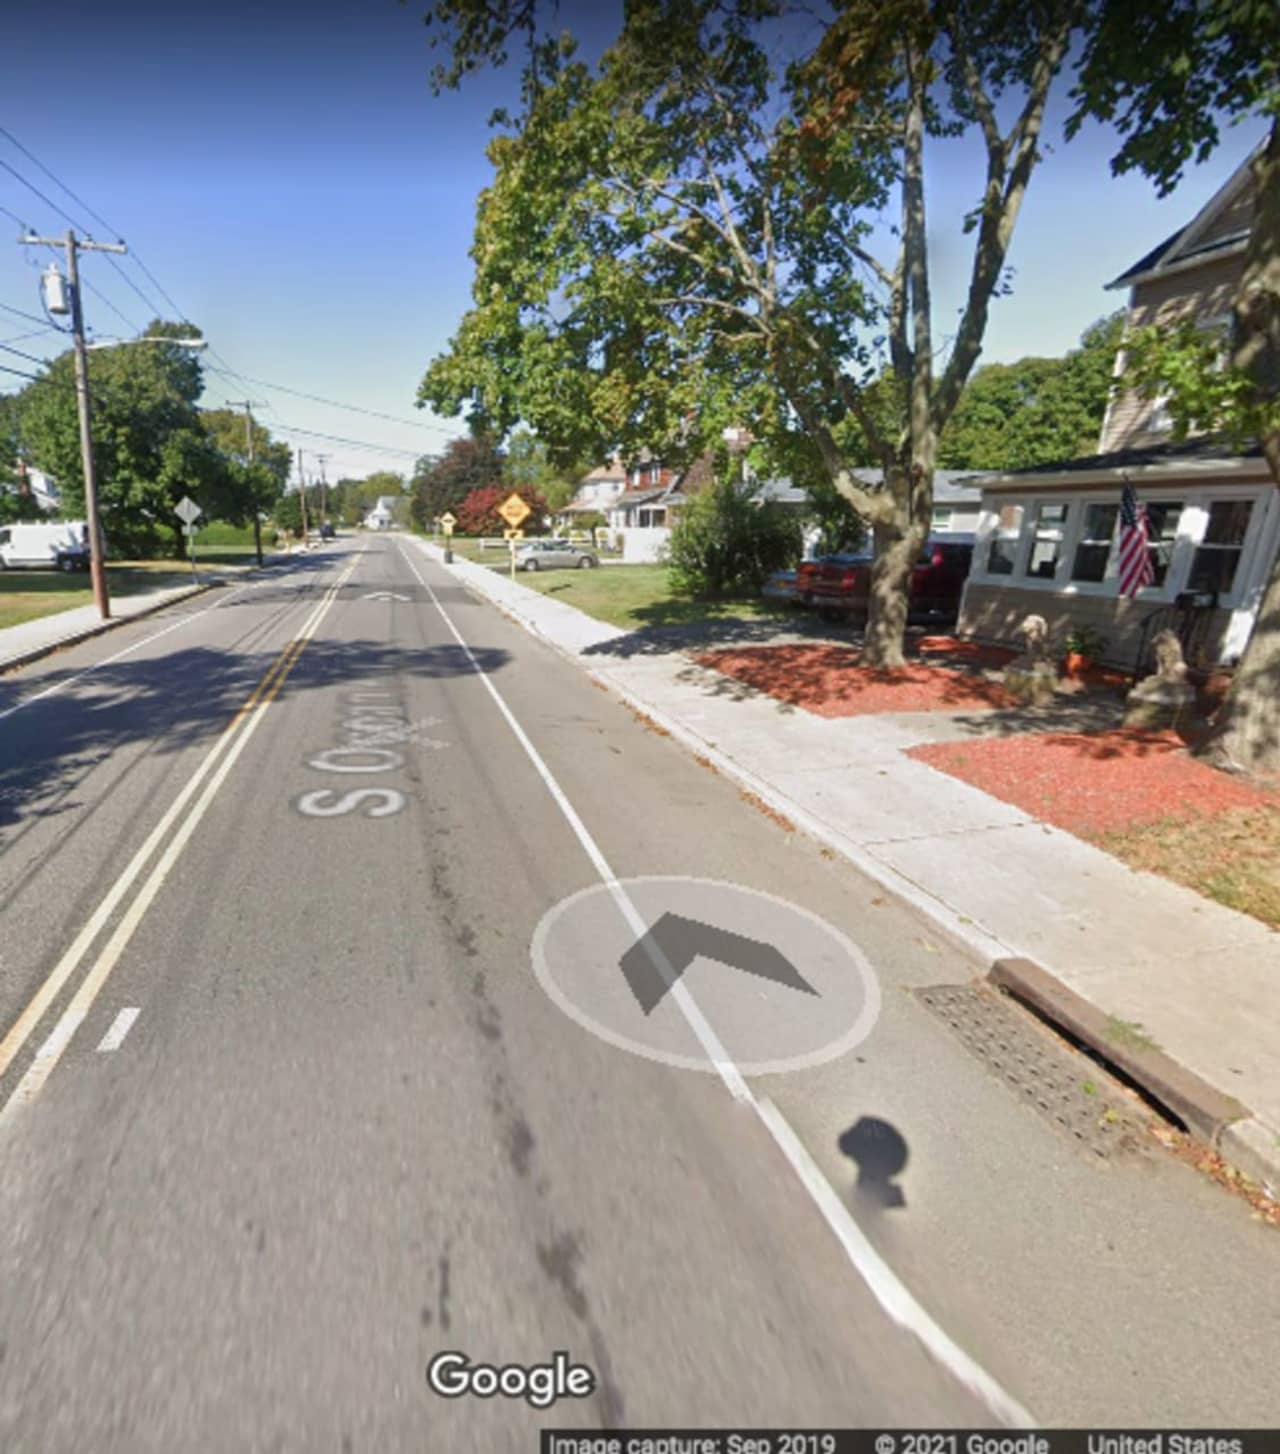 The area of South Ocean Avenue in Patchogue where the incident happened.